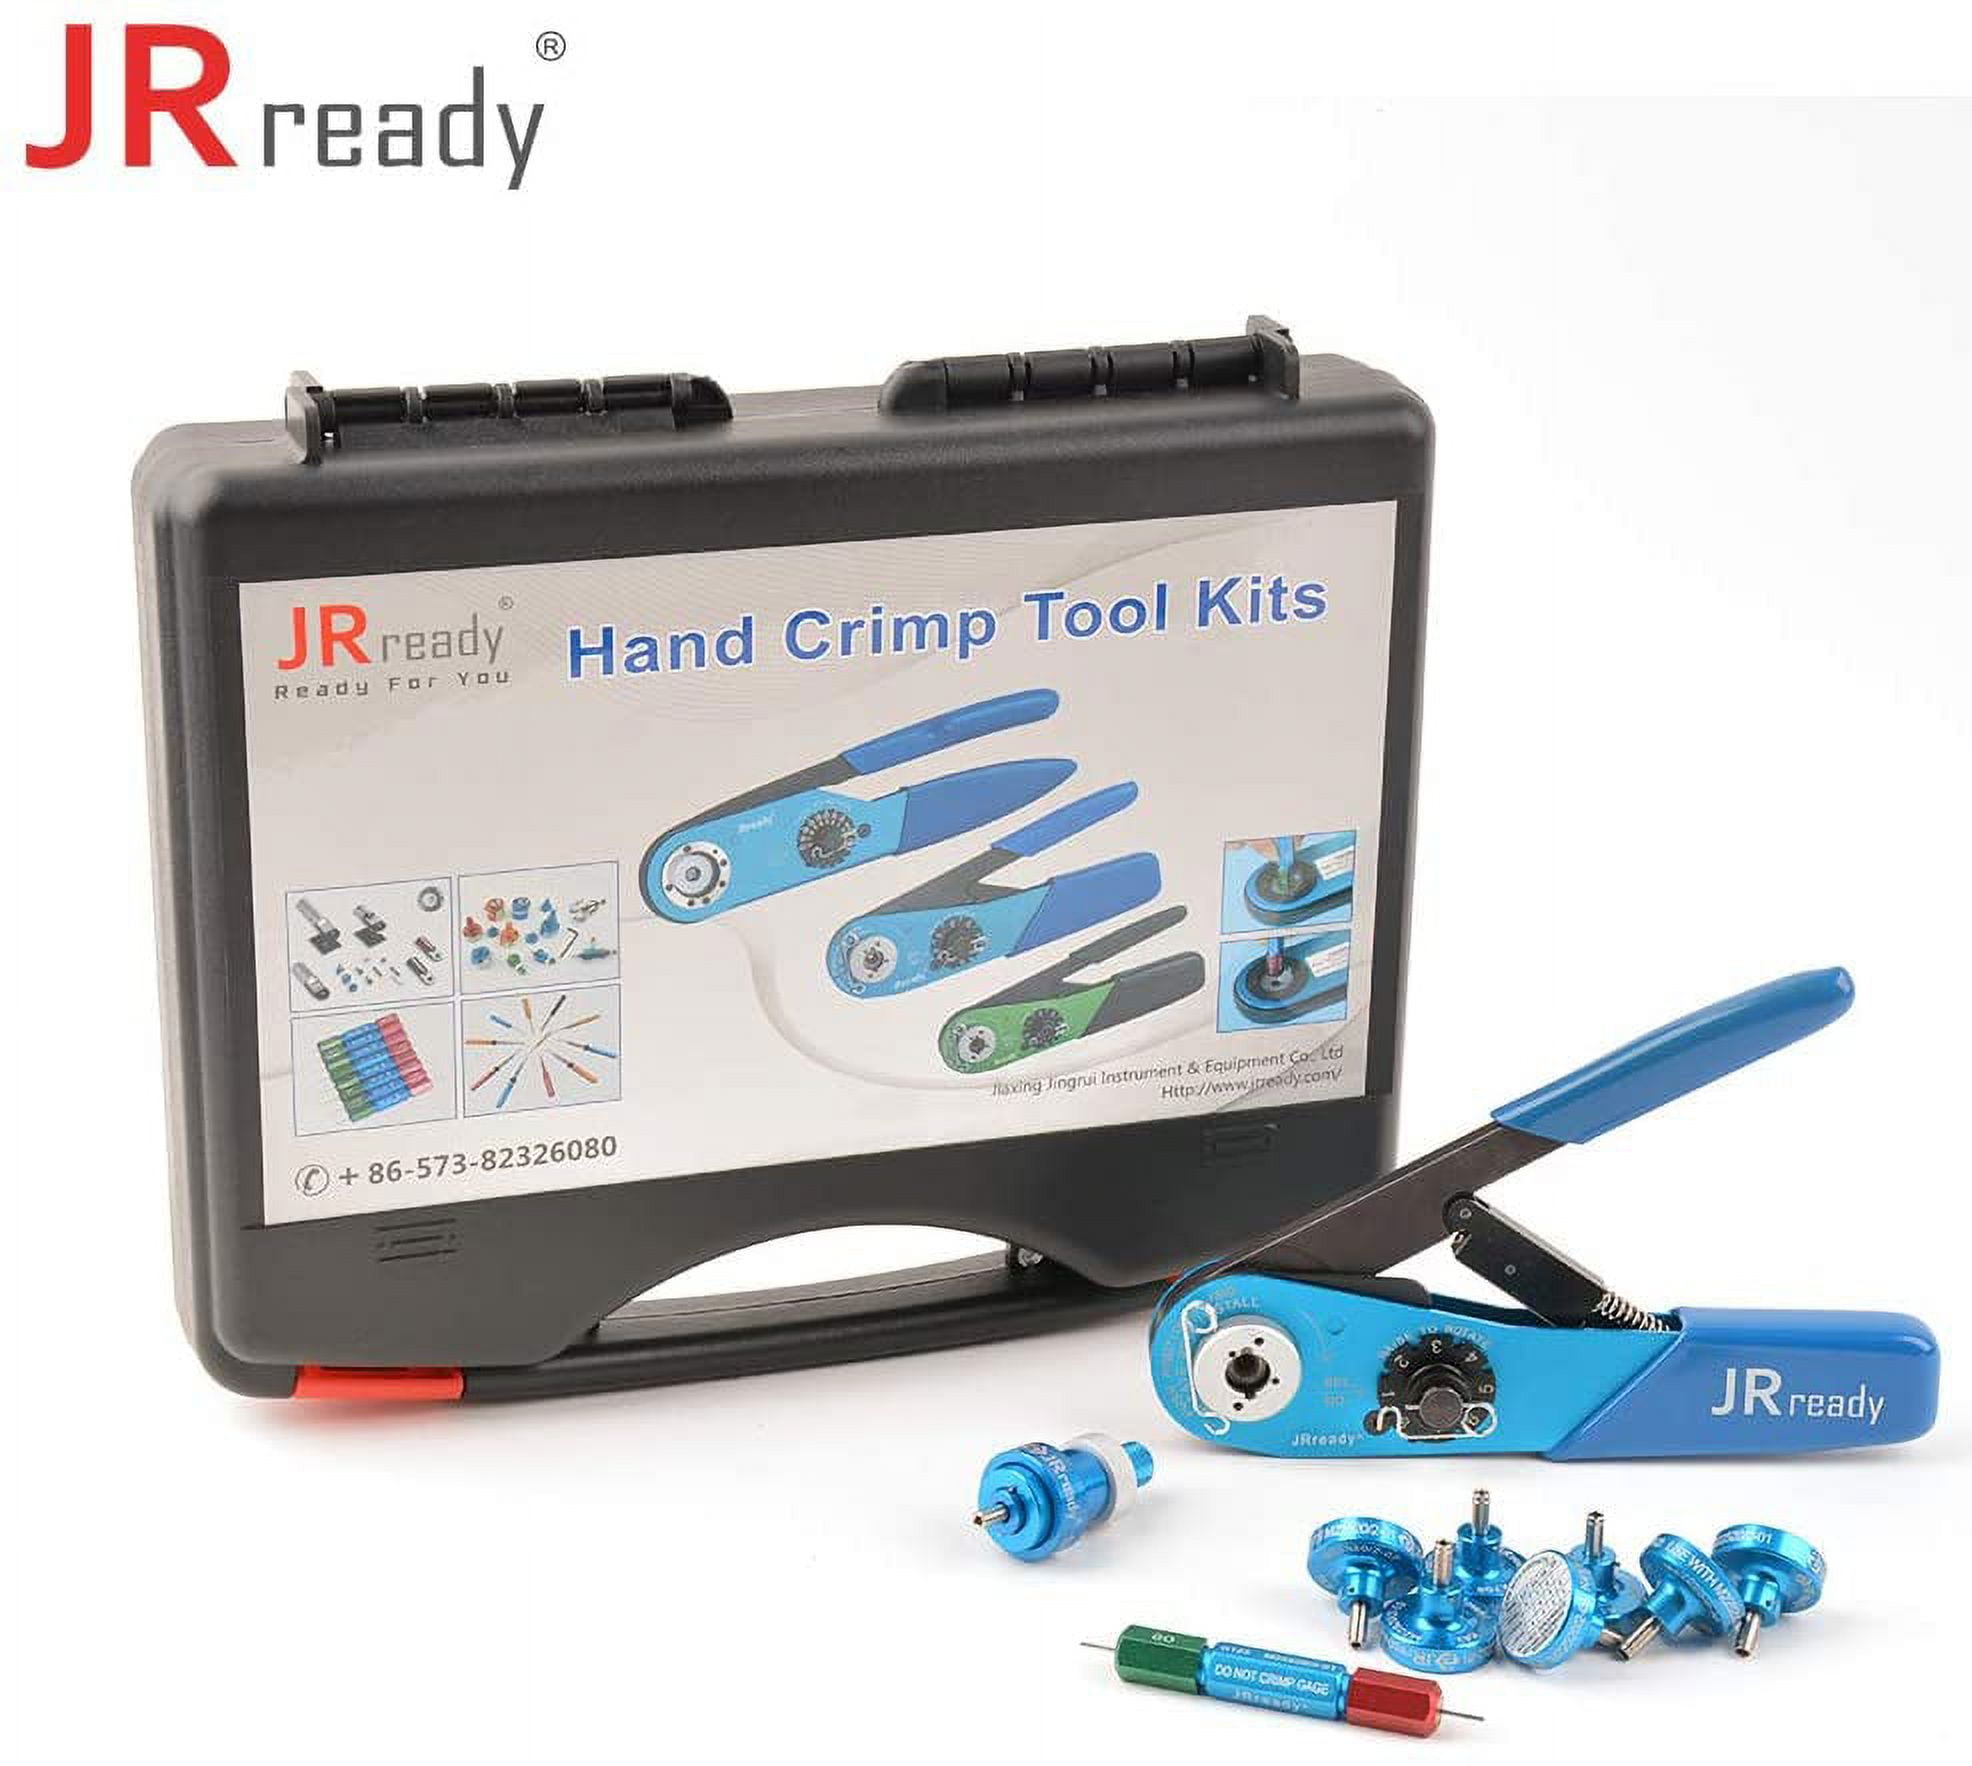 Crimp 2 Electronic JRready and and Positioner M22520 Aviation 7 Kit G125 for in Tool W1A 615717 YJQ Contact Systems ST2060 Gauge 20 Crimper Connector 01 Solid of Miniature 32awg Indent Barrel